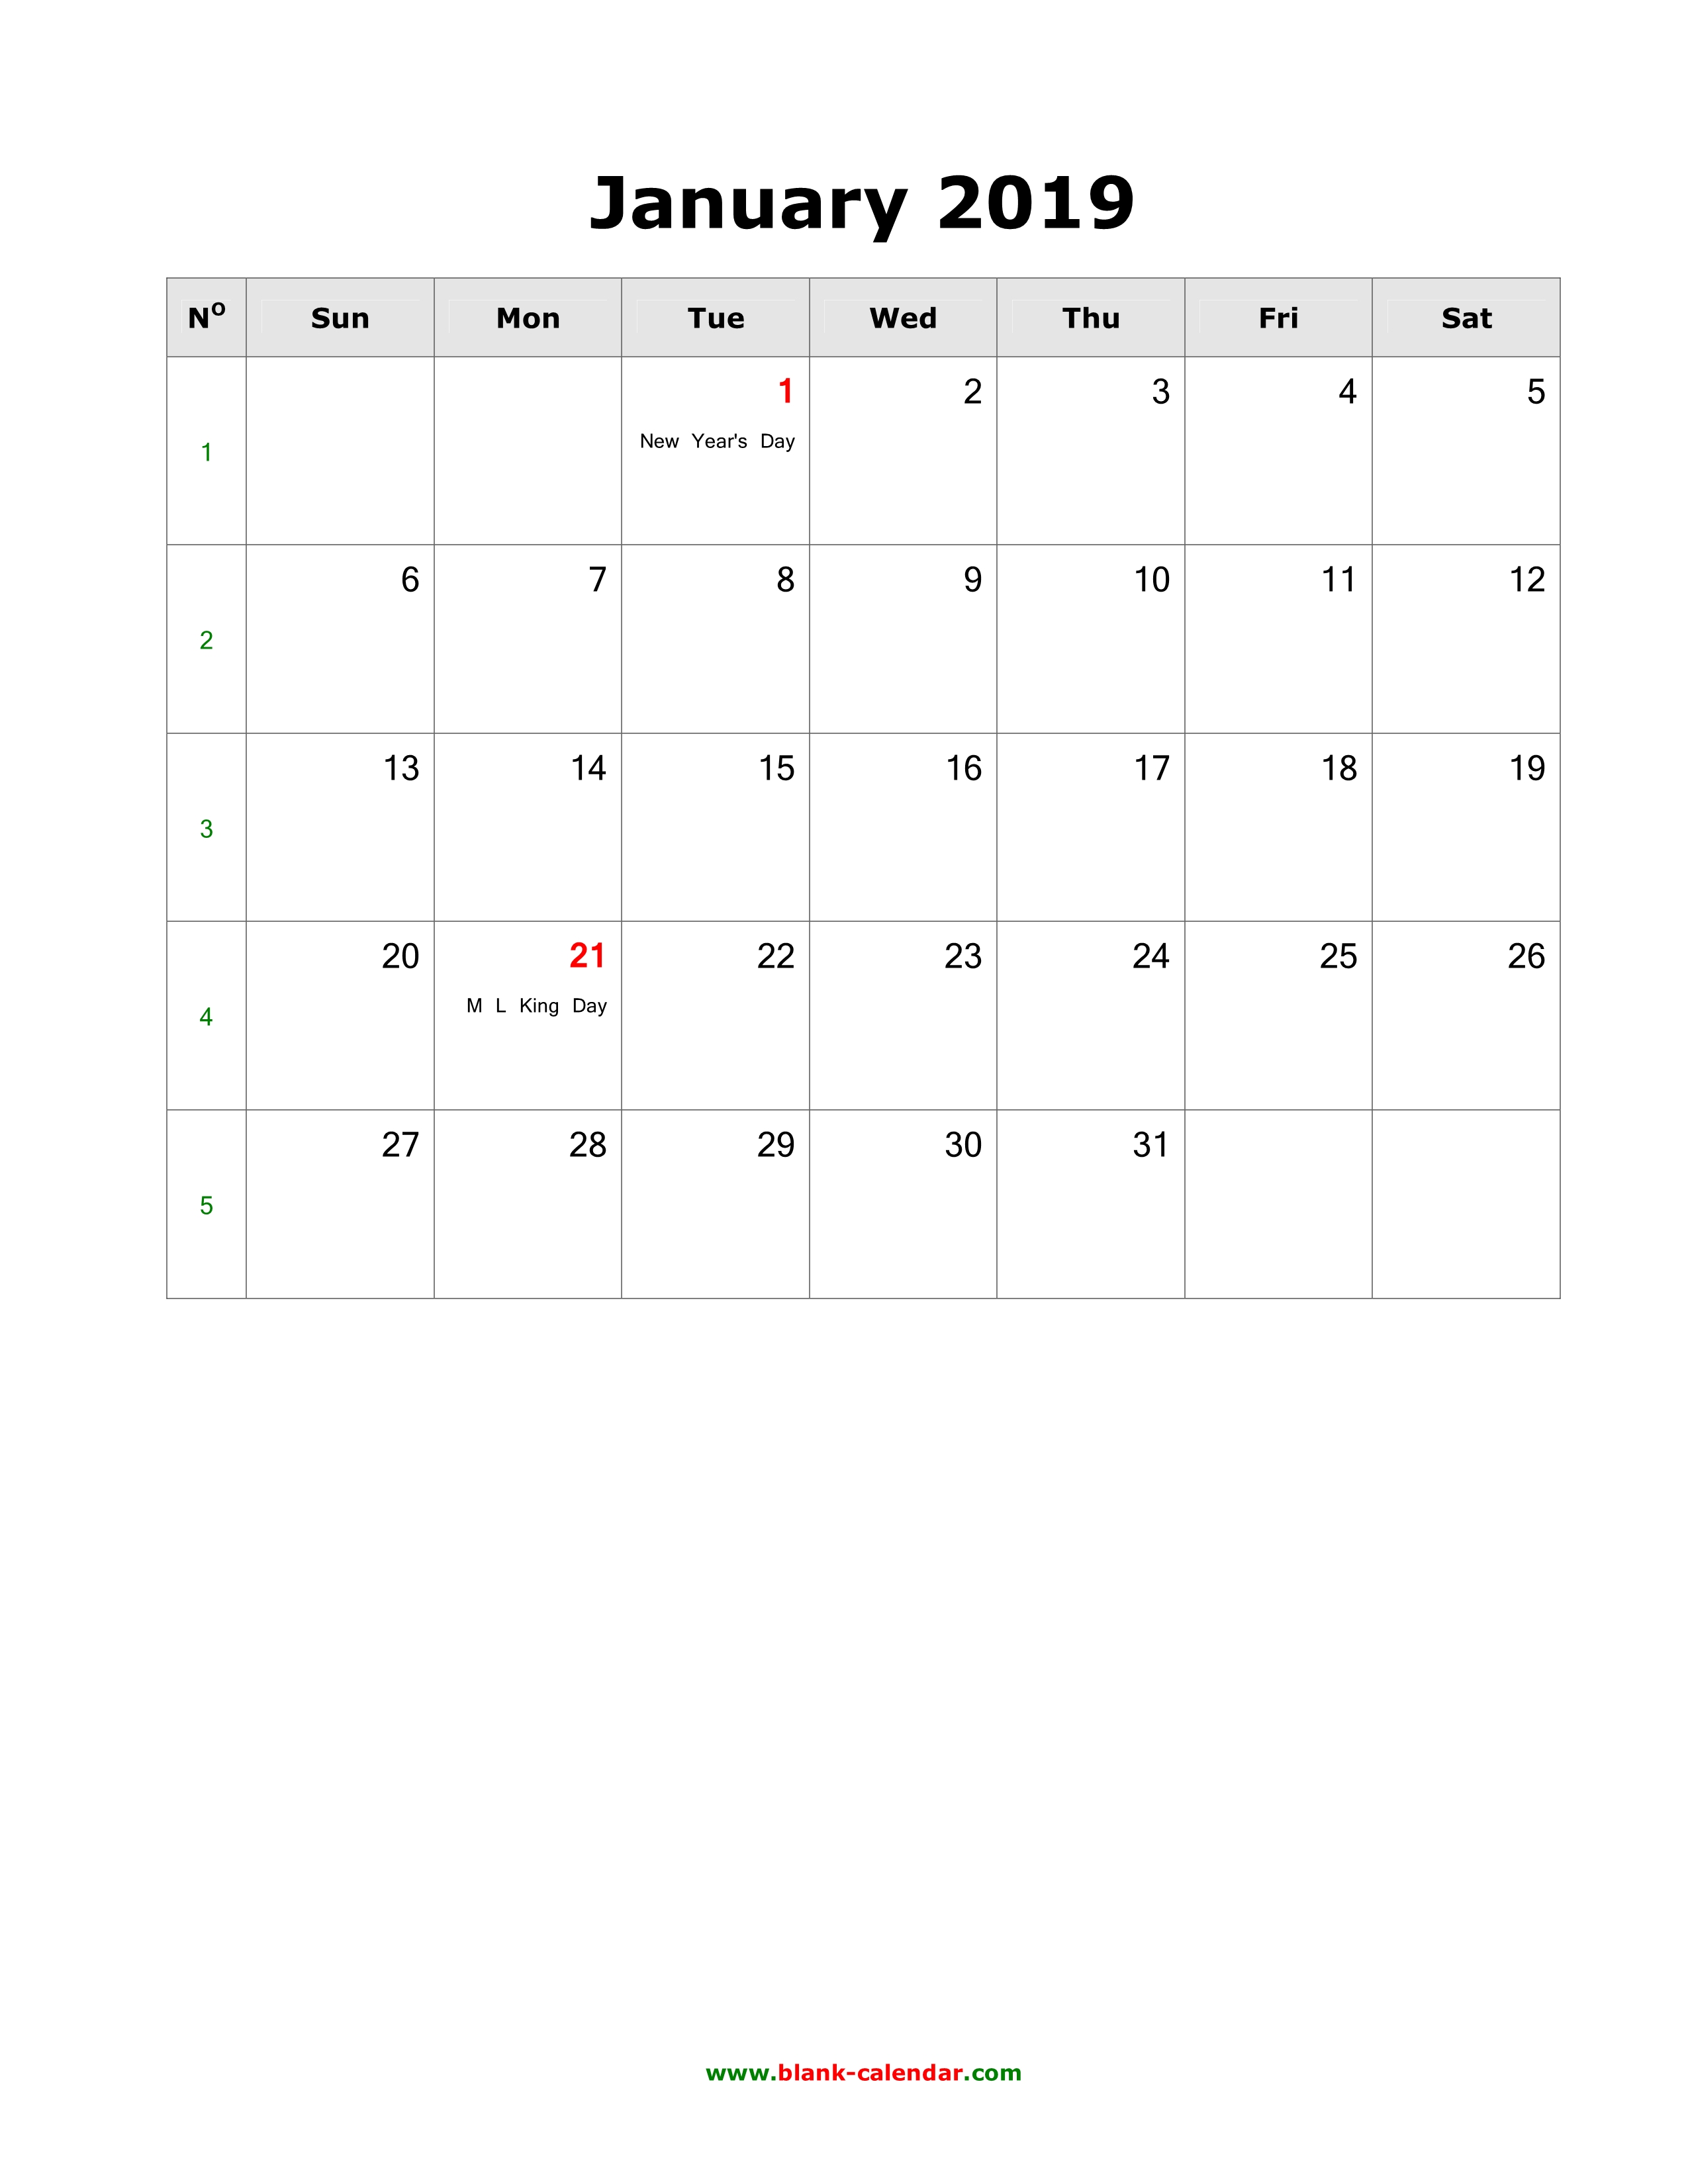 download-january-2019-blank-calendar-with-us-holidays-vertical